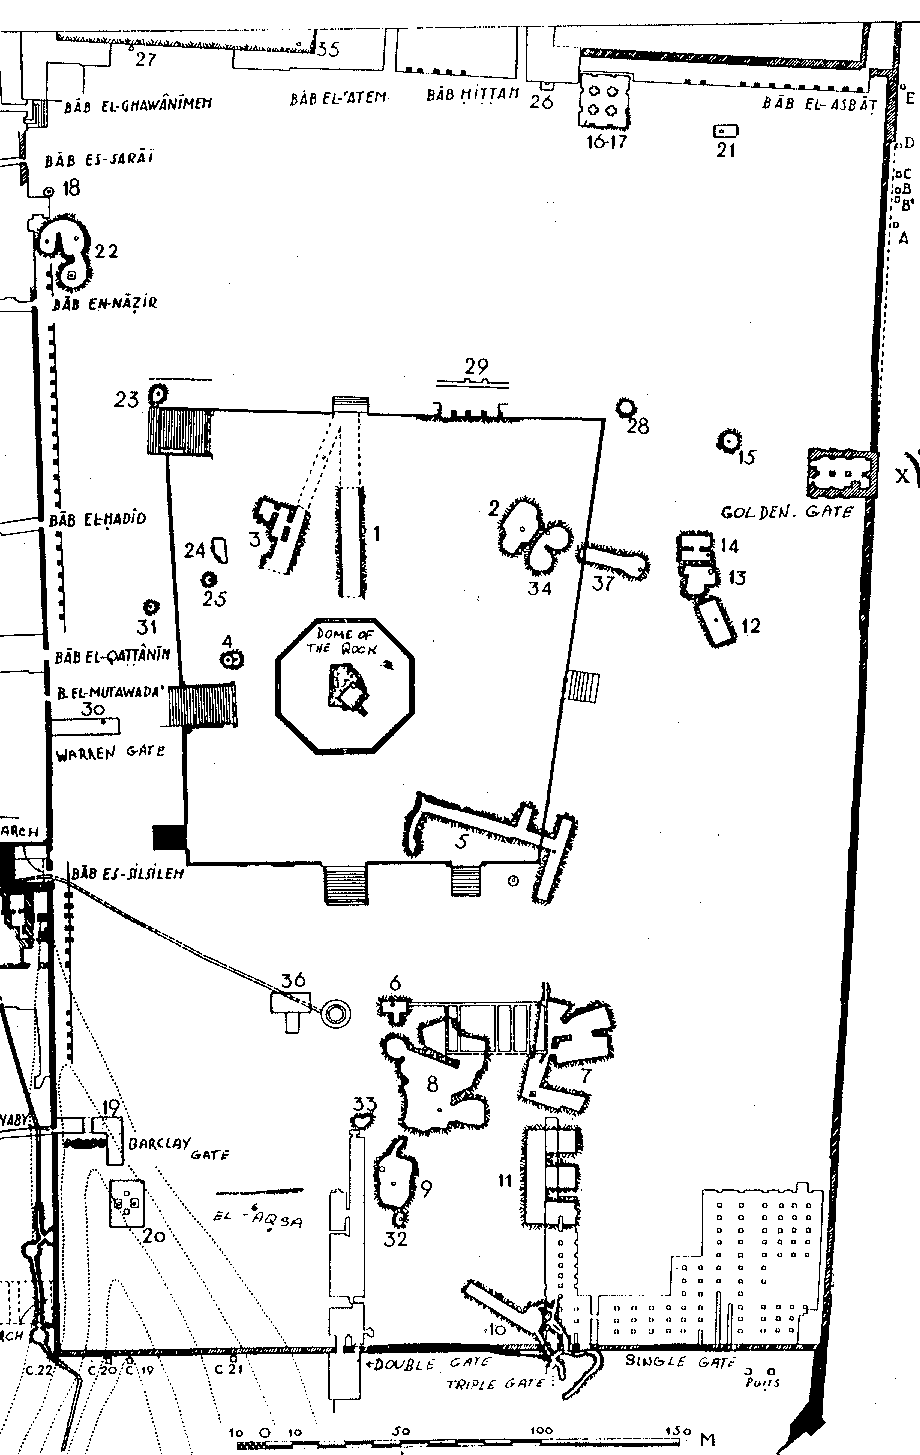 wilson's map of features under the temple mount